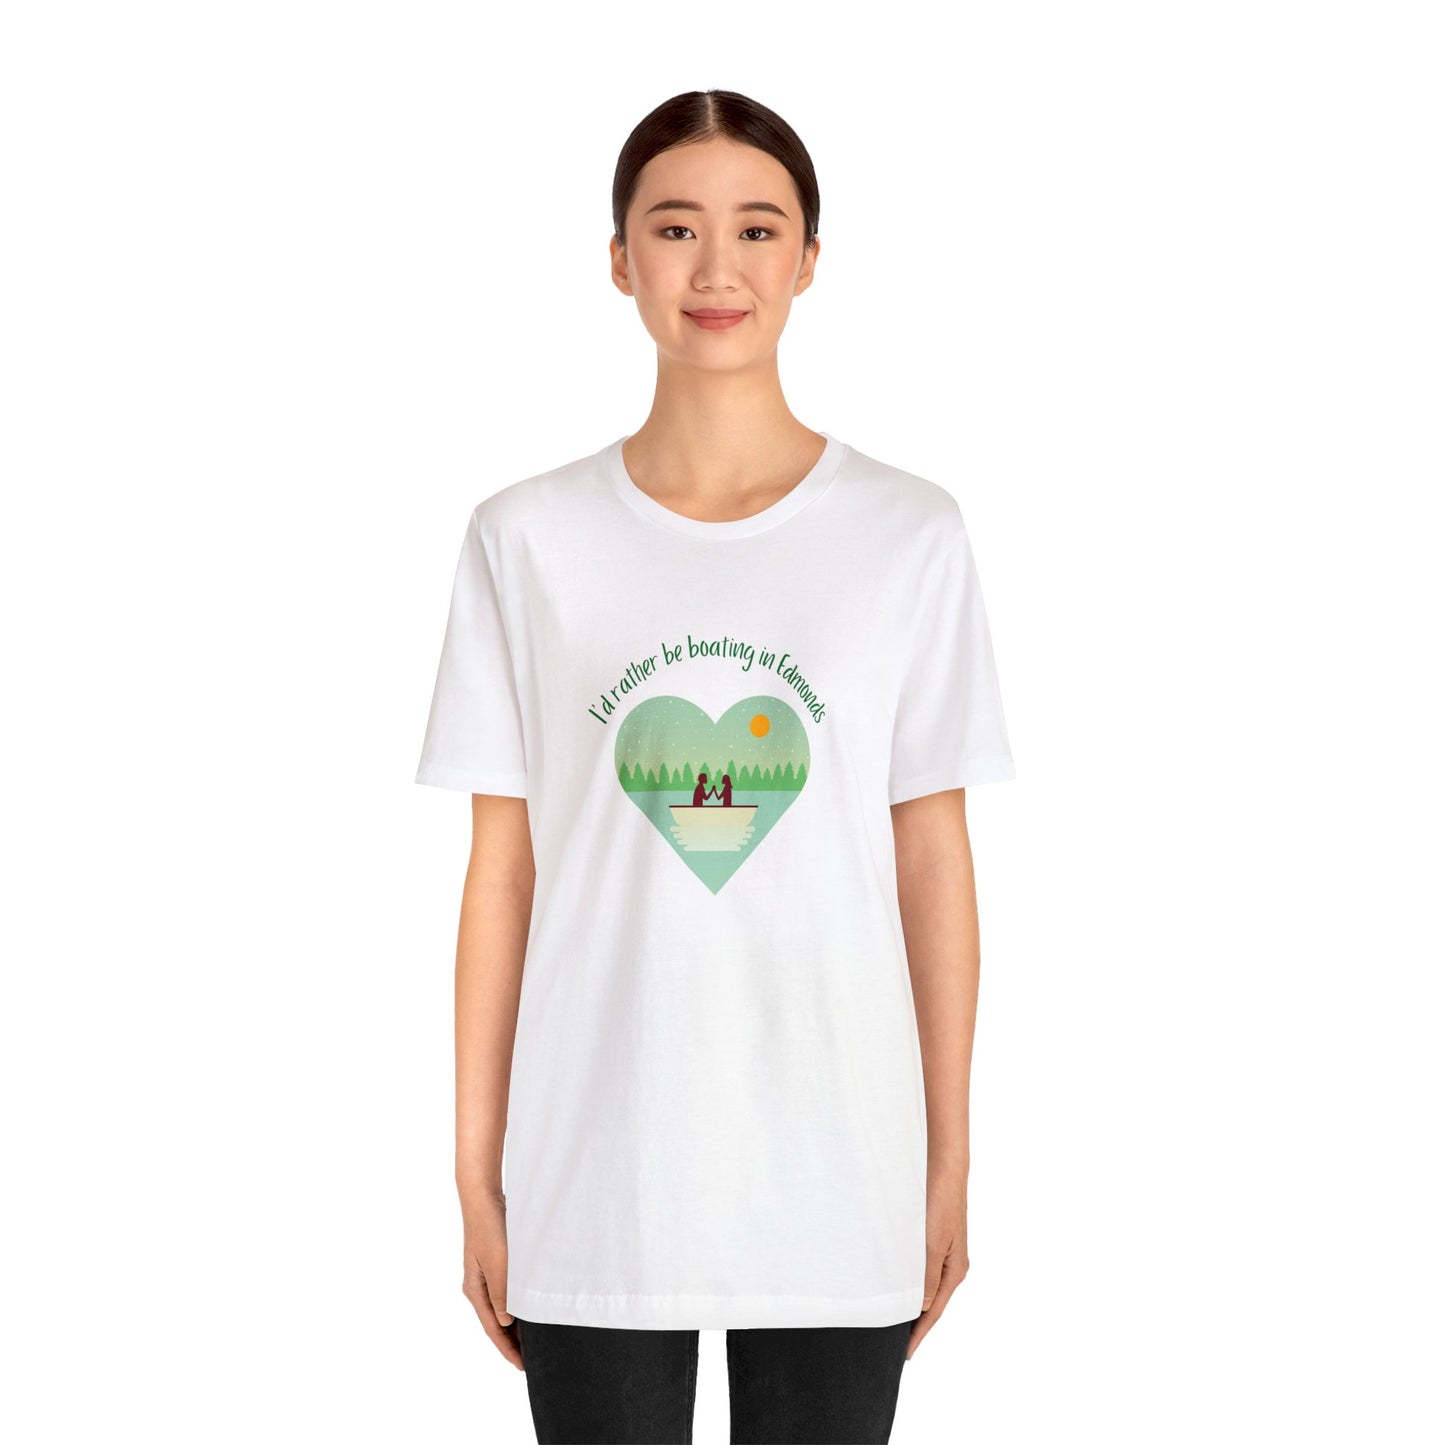 I'd rather be boating in Edmonds heart T-shirt